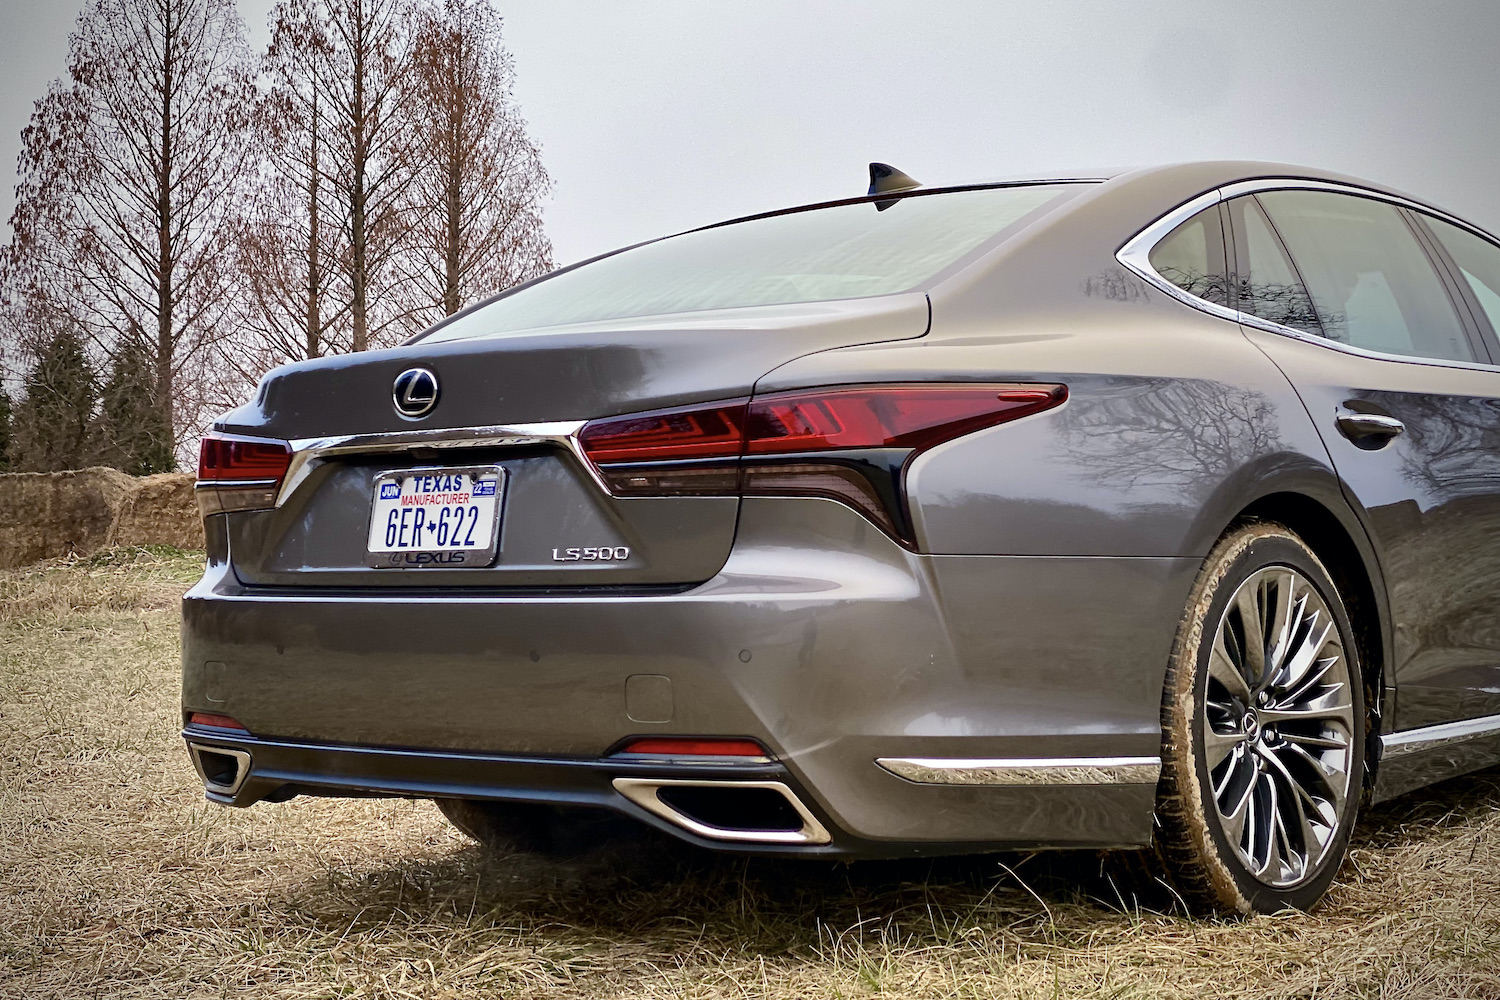 The rear end of the 2021 Lexus LS500 from passenger's side with trees in the back.